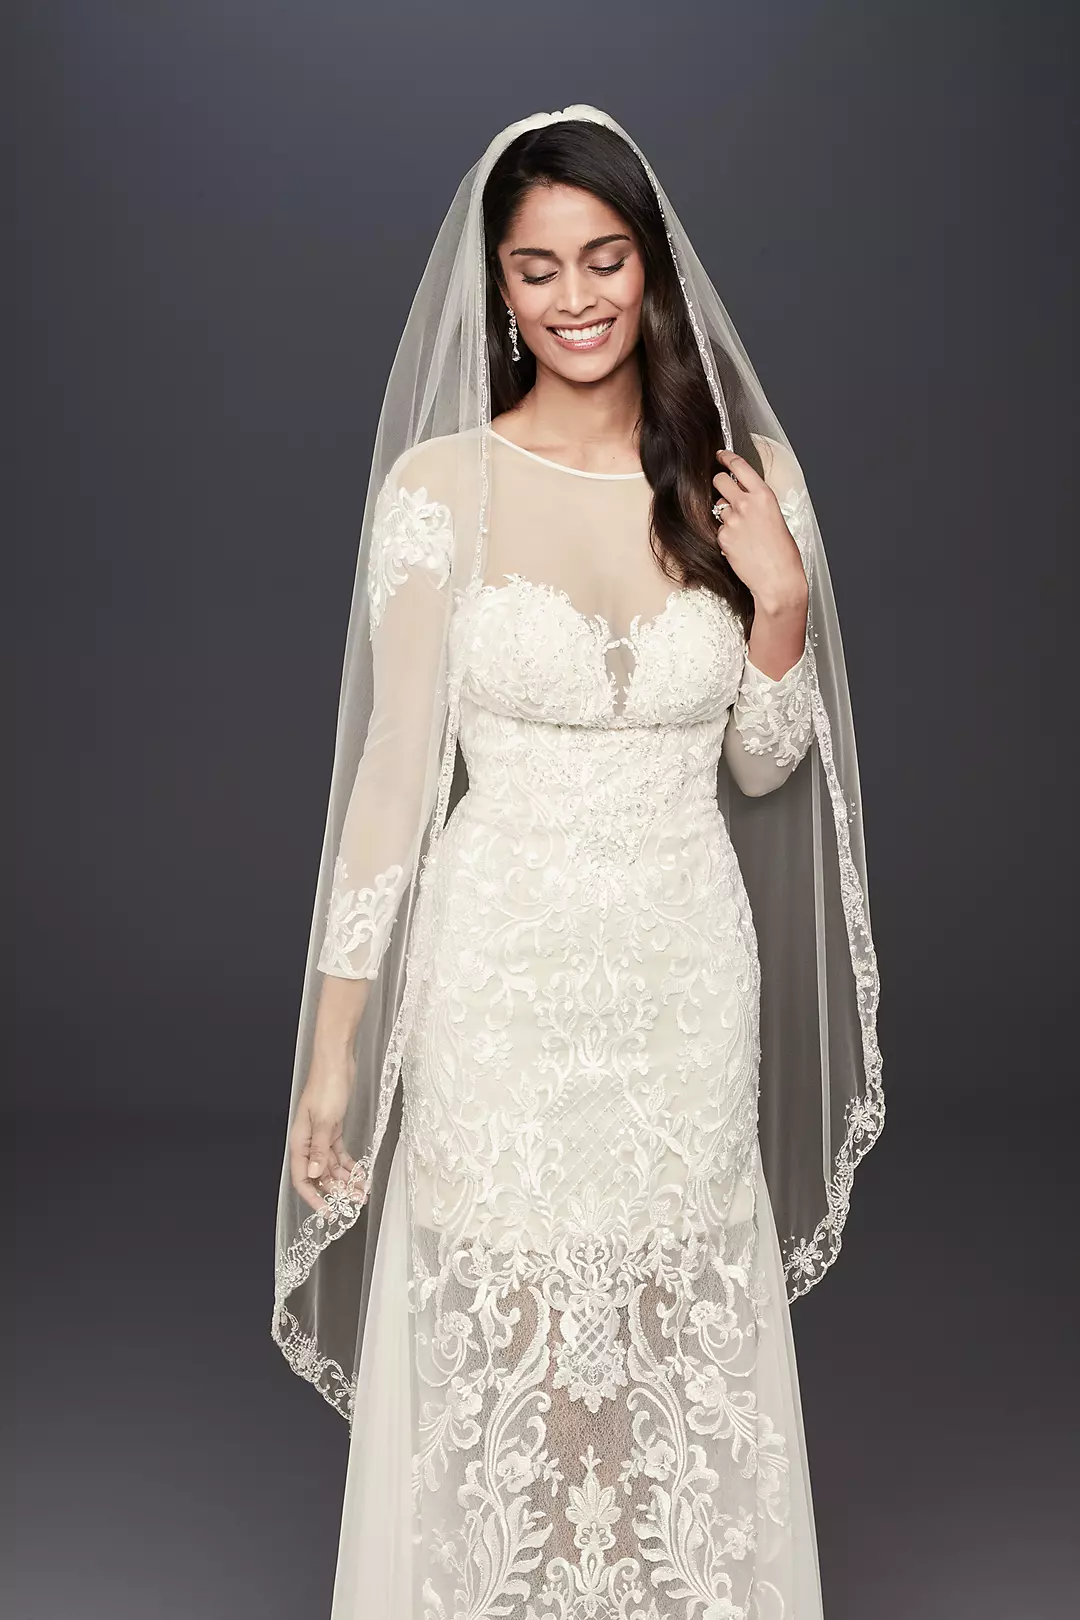 Crystal Flowers Embroidered Veil with Scallop Hem Image